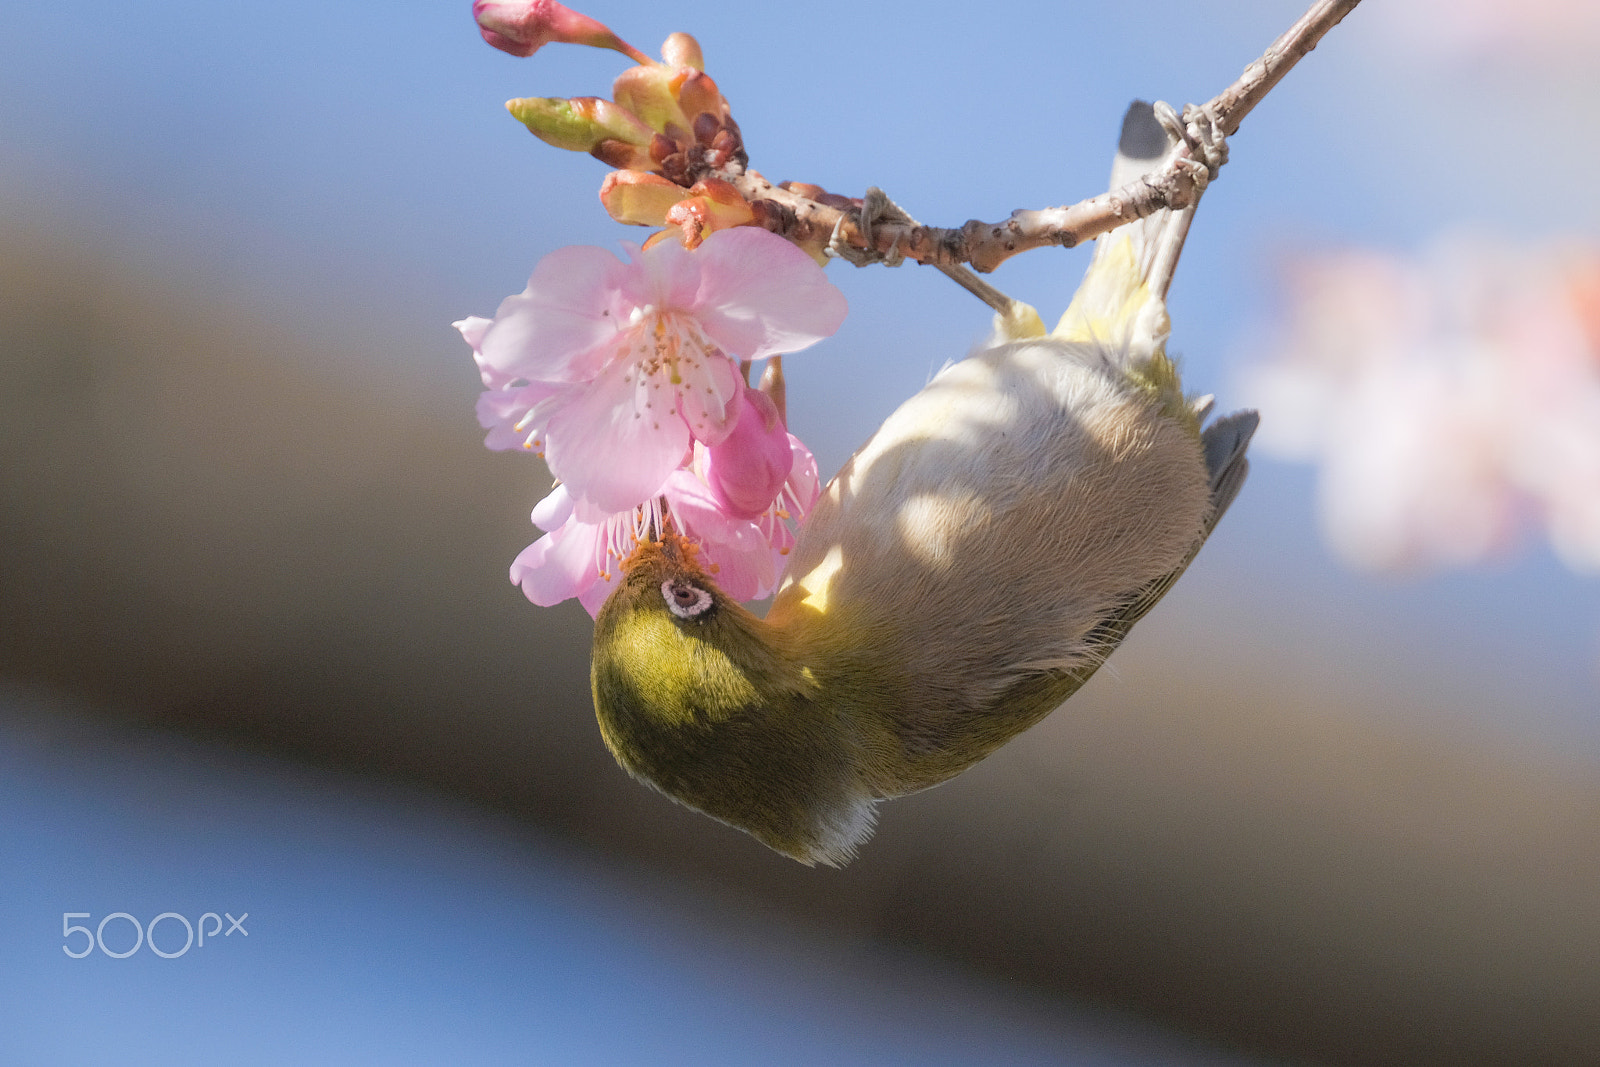 XF100-400mmF4.5-5.6 R LM OIS WR + 1.4x sample photo. Get a spring blessing photography